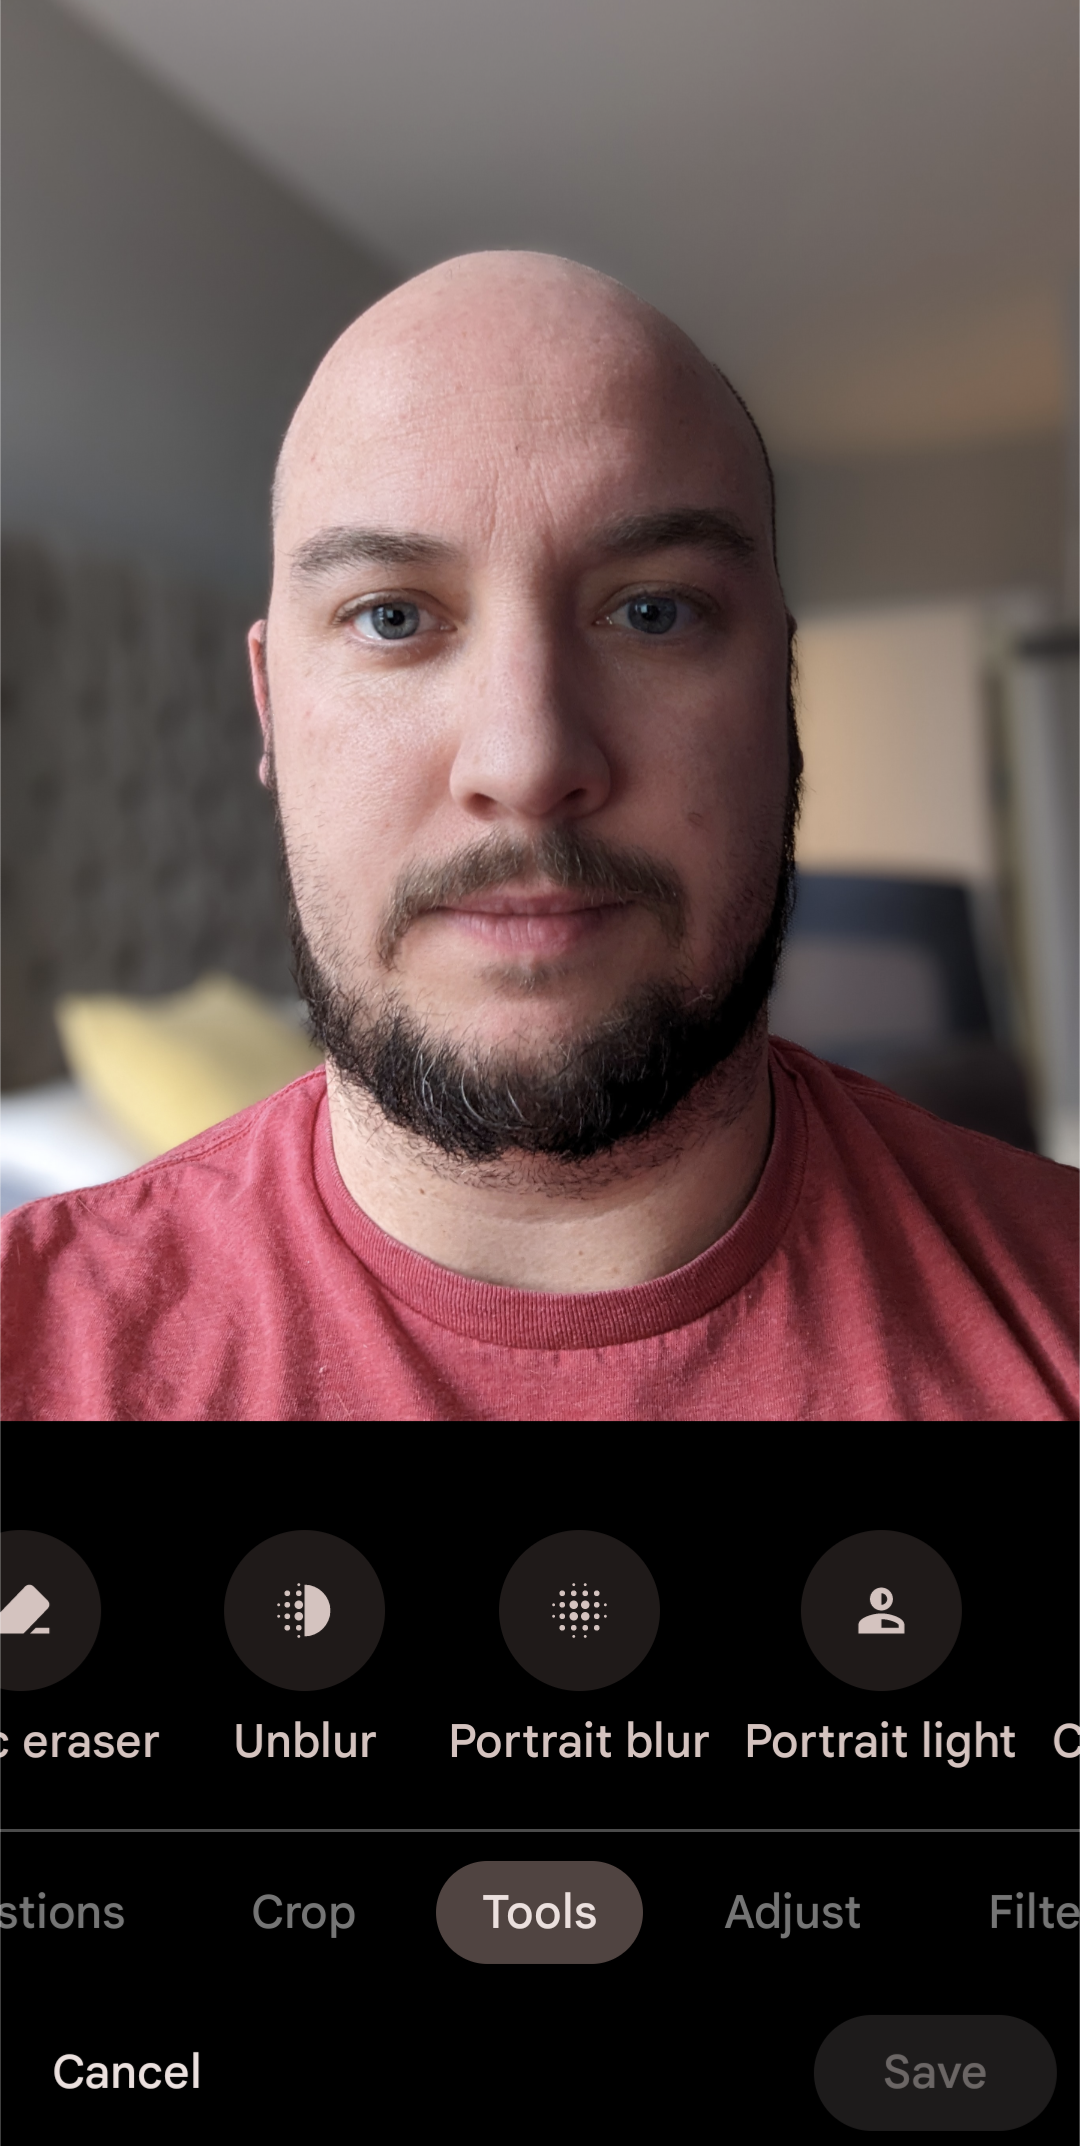 An image of a person in a red shirt in the Pixel's camera app with the tools icon selected. 